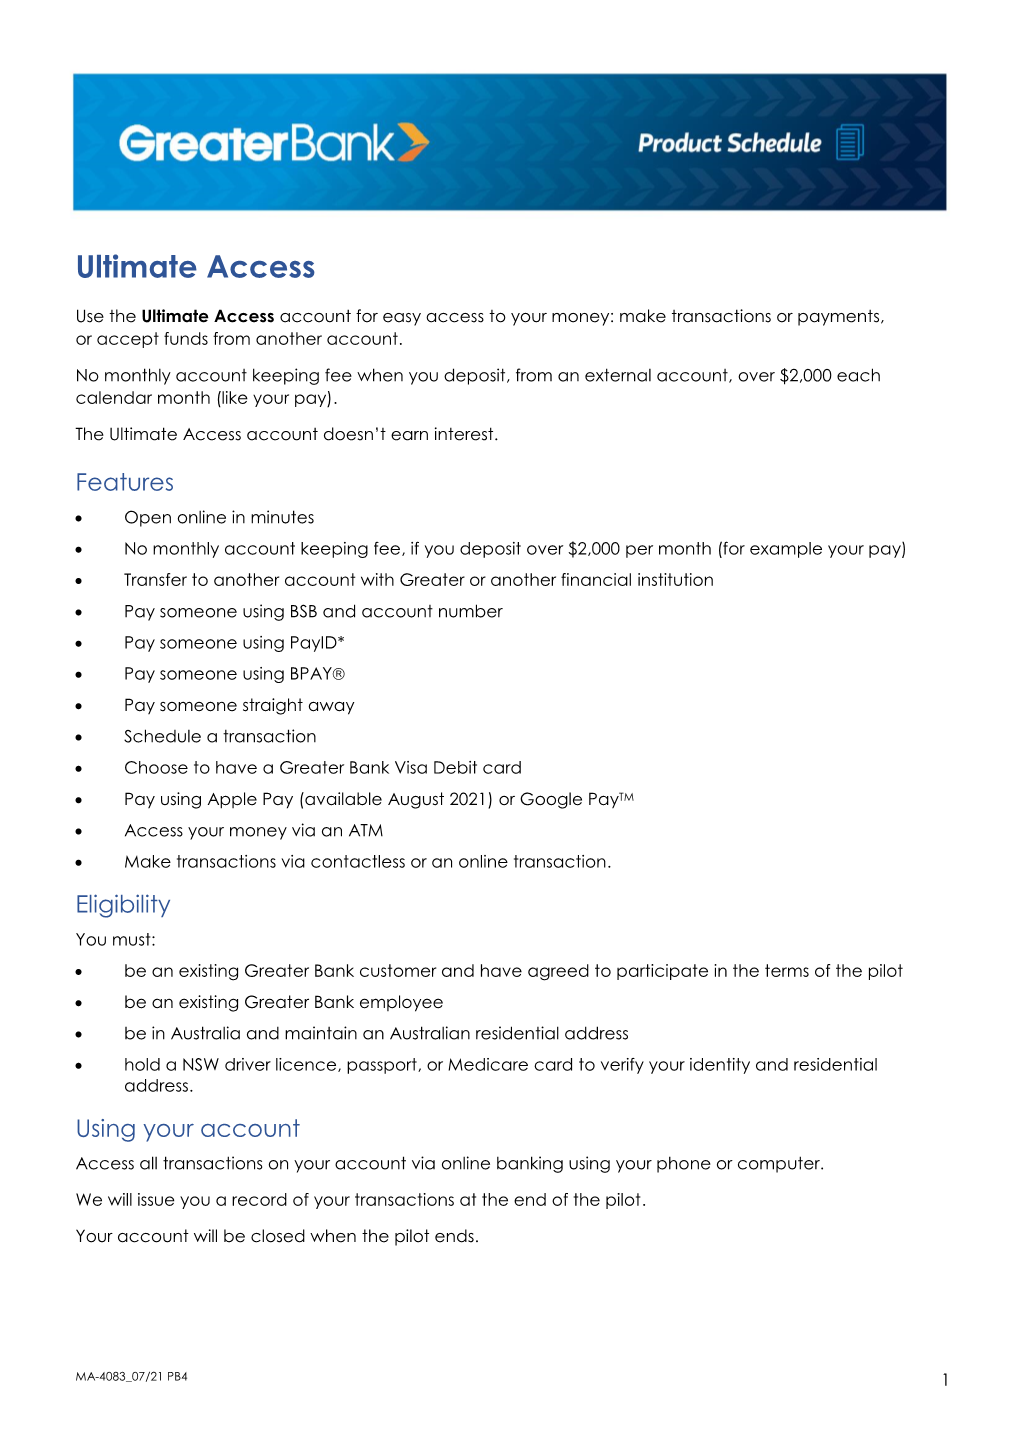 Greater Bank Ultimate Access Product Schedule